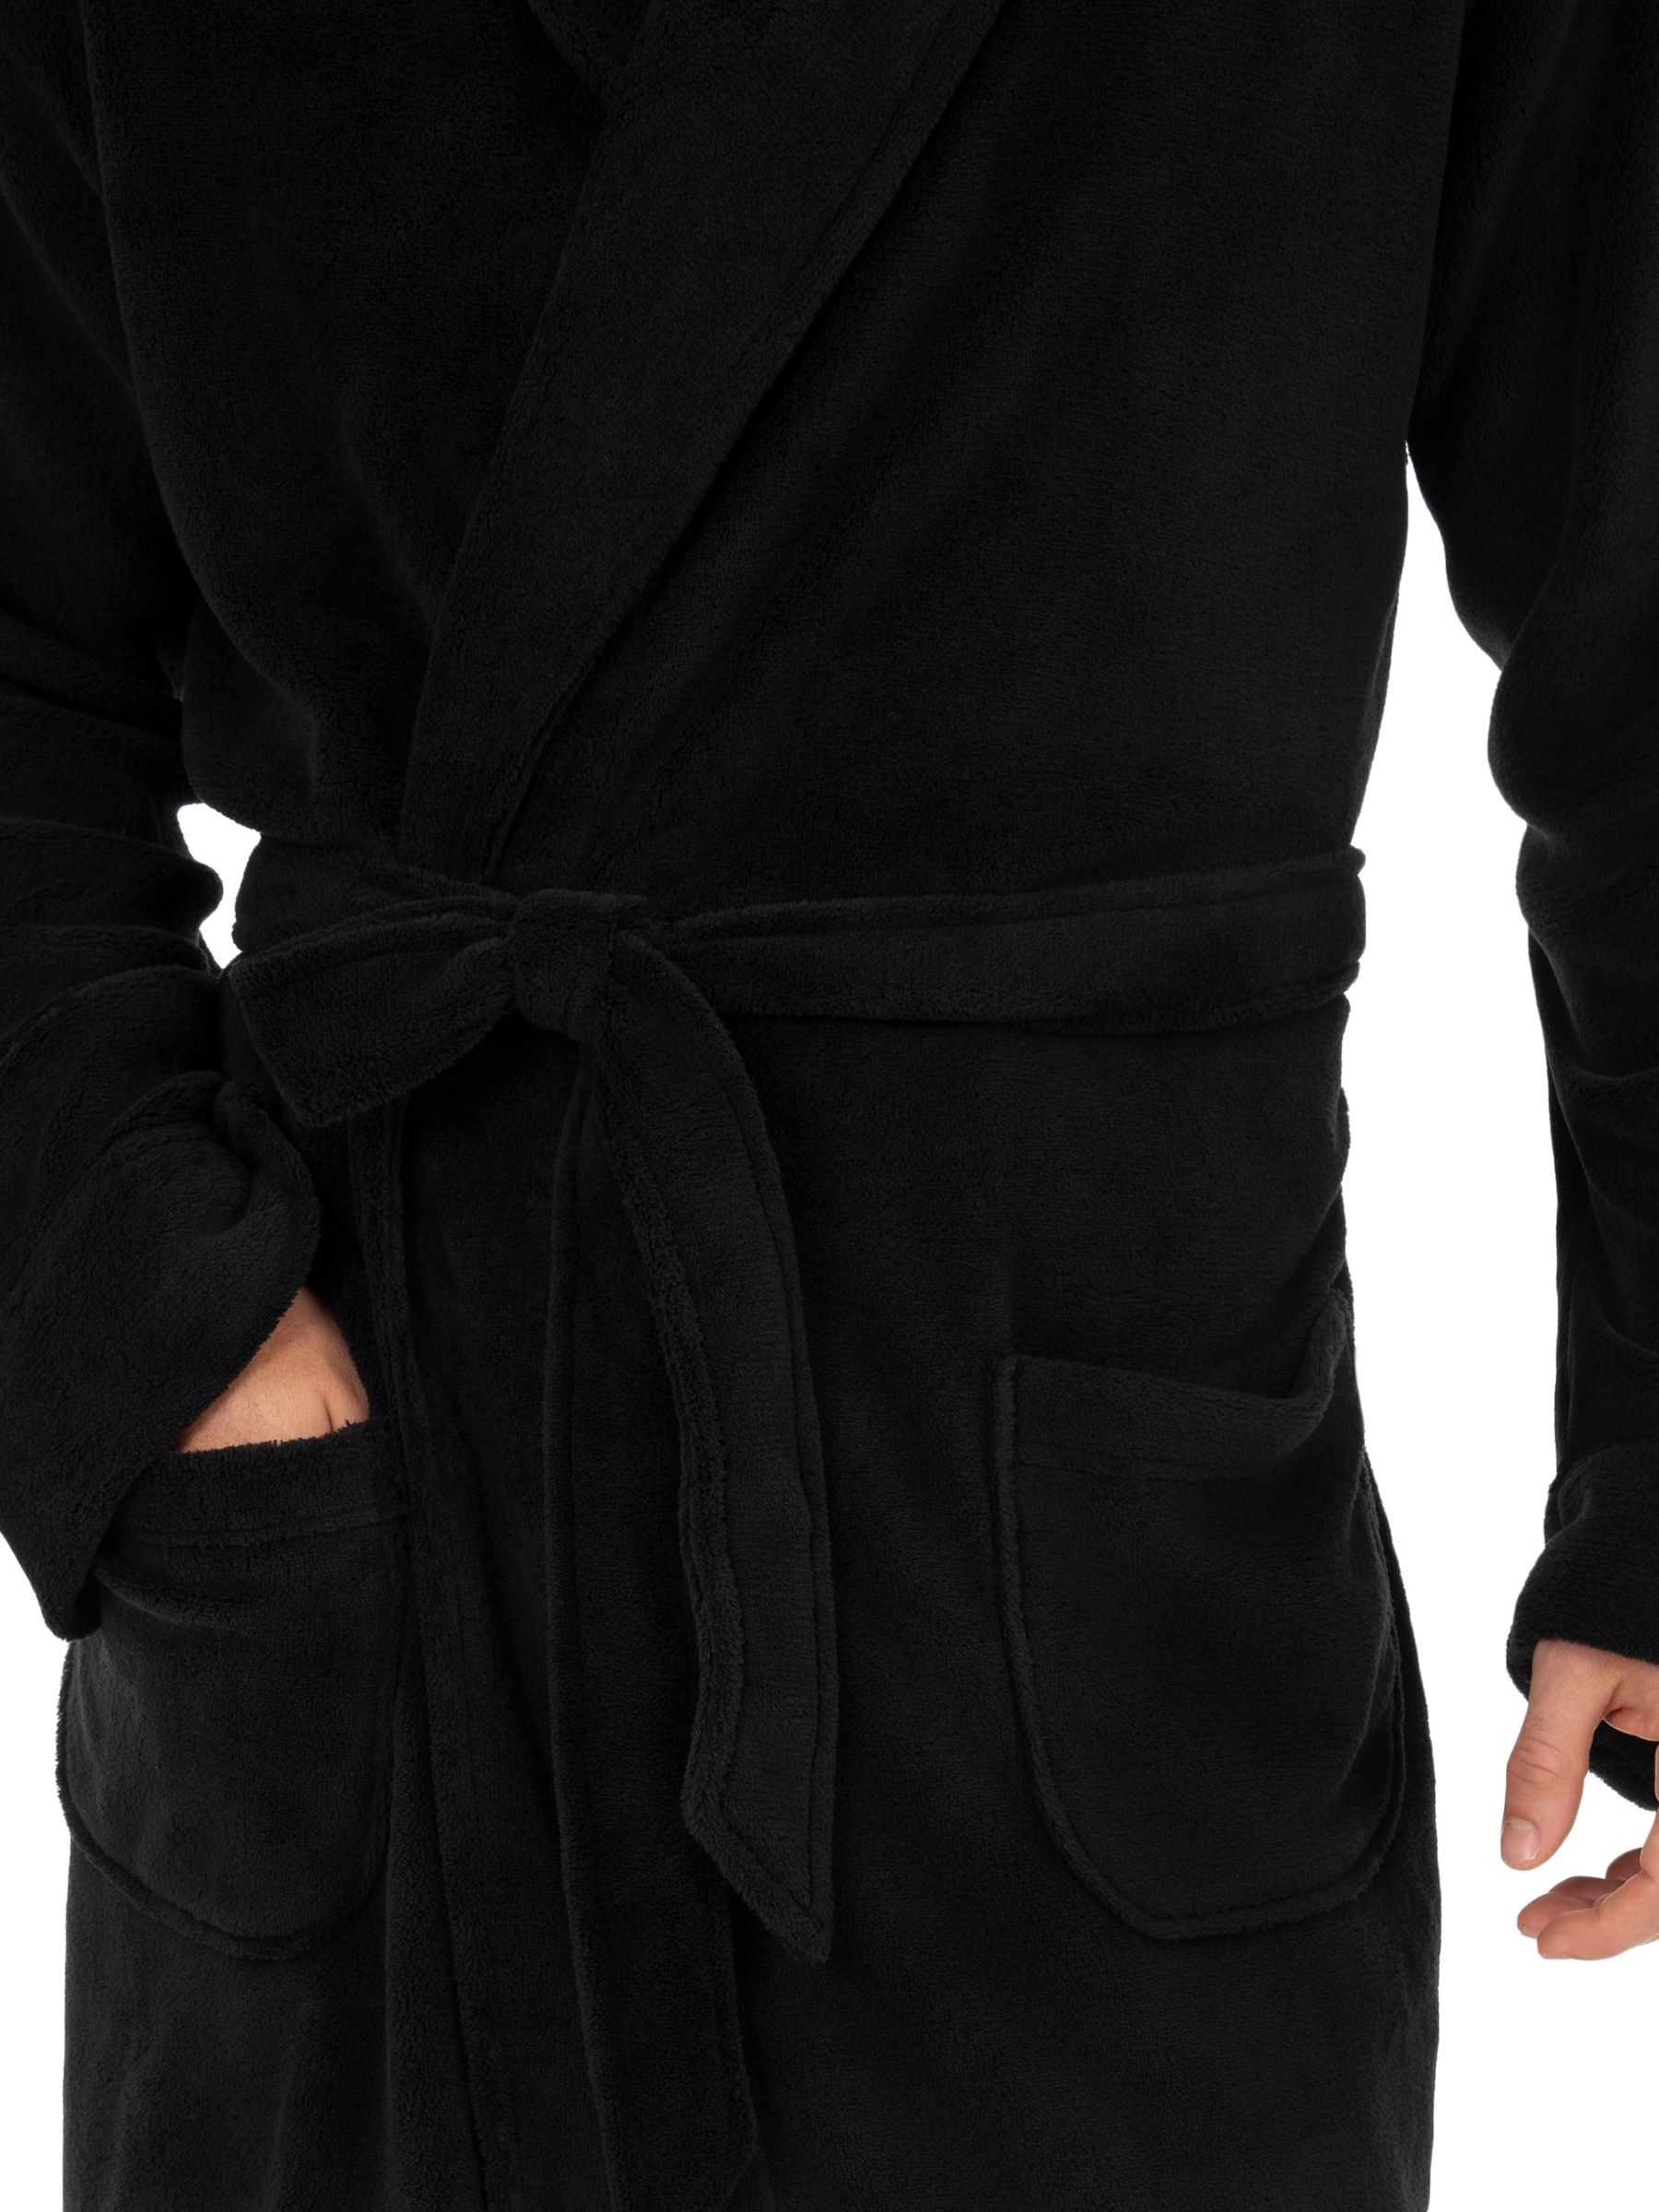 Fruit of the Loom Adult Mens Solid Plush Fleece Bathrobe One Size - image 3 of 4